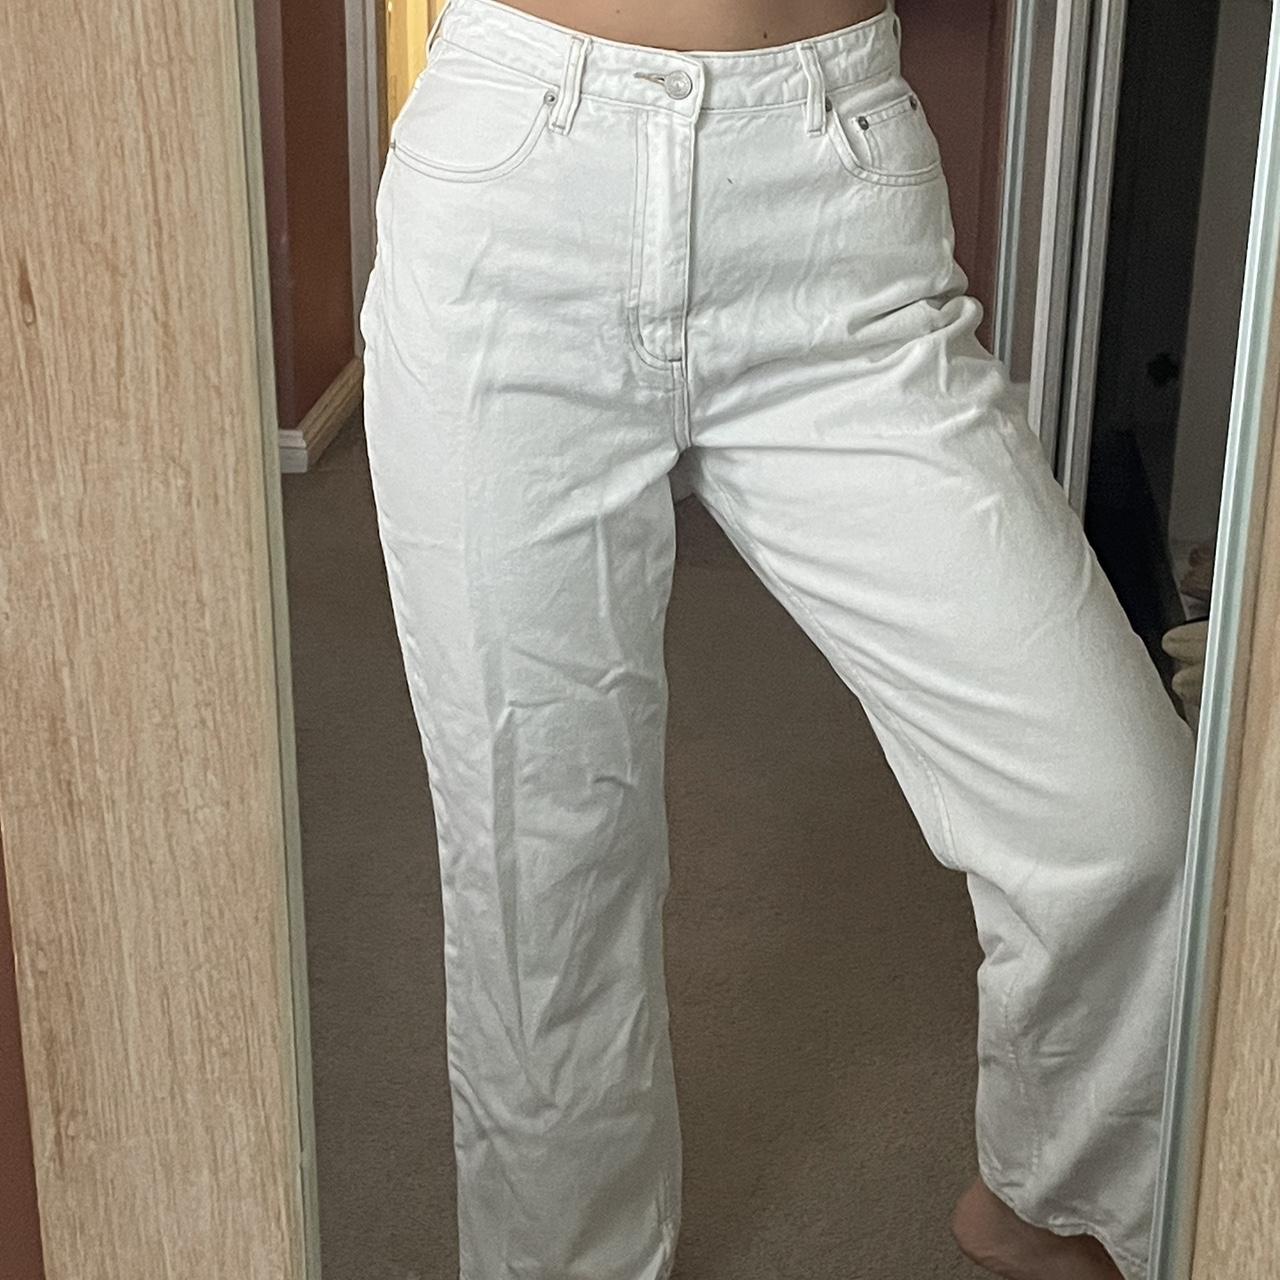 Lee baggy high waisted white jeans - Depop